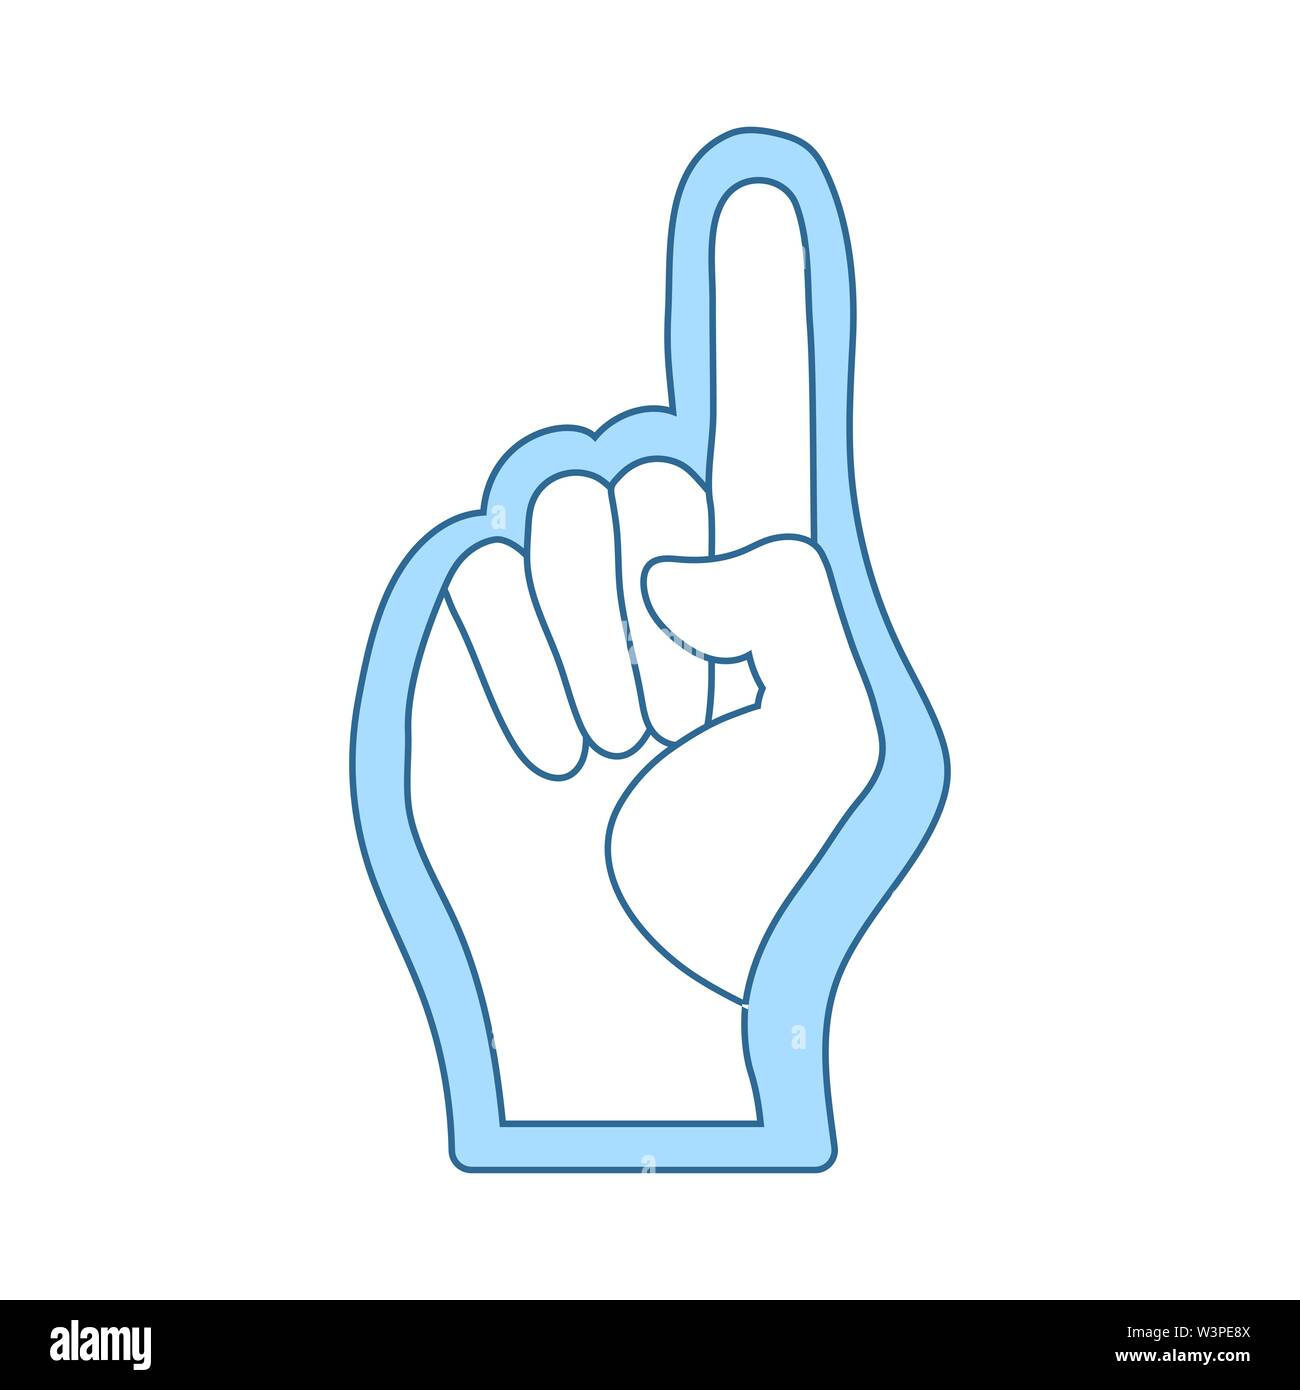 Fan Foam Hand With Number One Gesture Icon. Thin Line With Blue Fill Design. Vector Illustration. Stock Vector